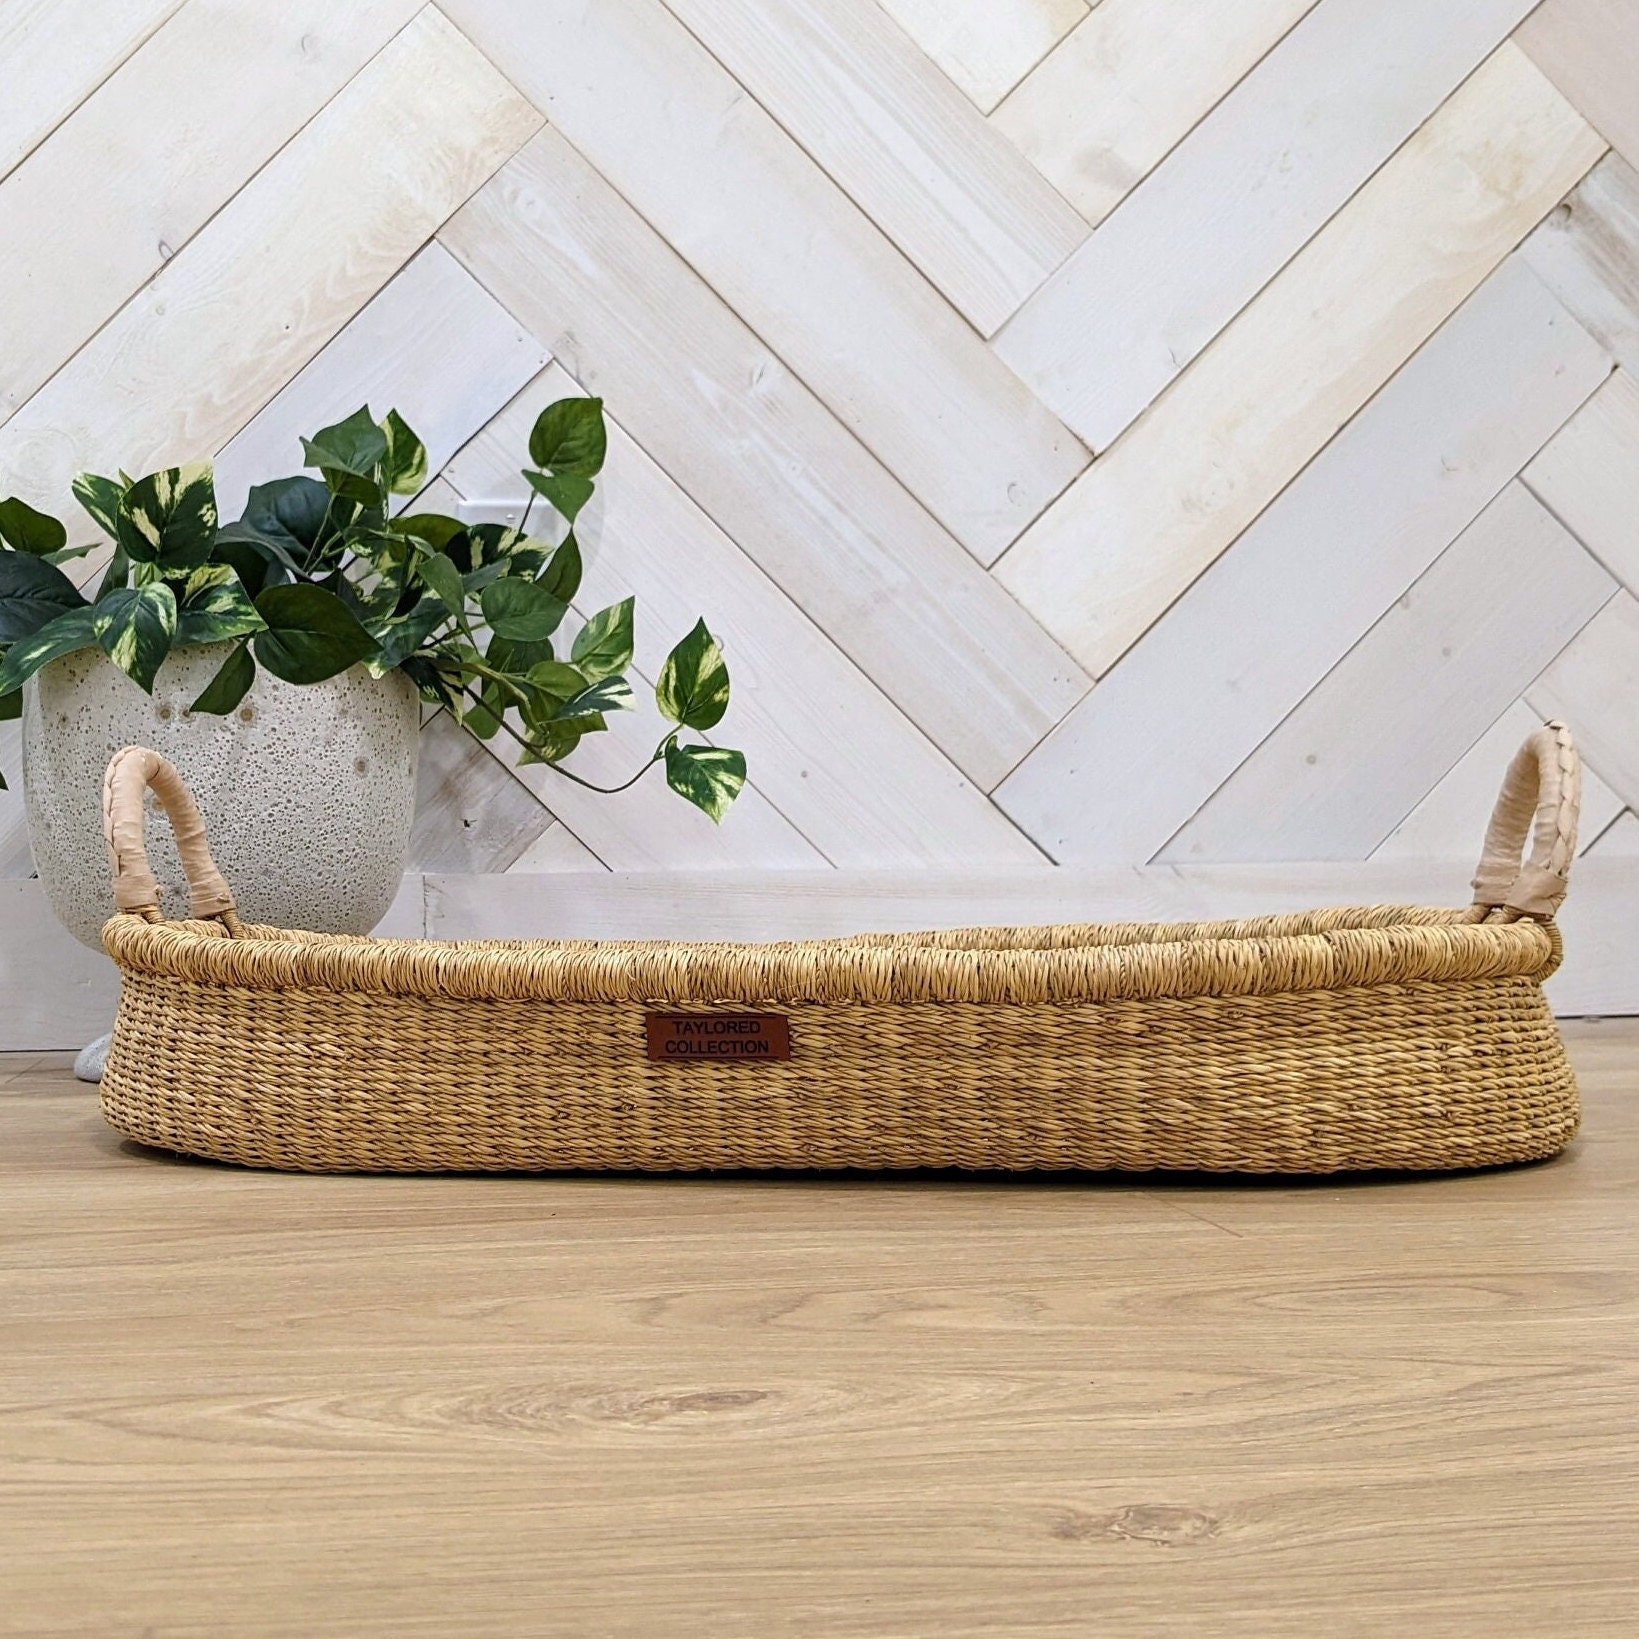 2 Bundles Basket Making Supplies Wedding Ceremony Decorations Bamboo  Material Flat Coil Basket Reeds Strip Strips For Weaving - AliExpress